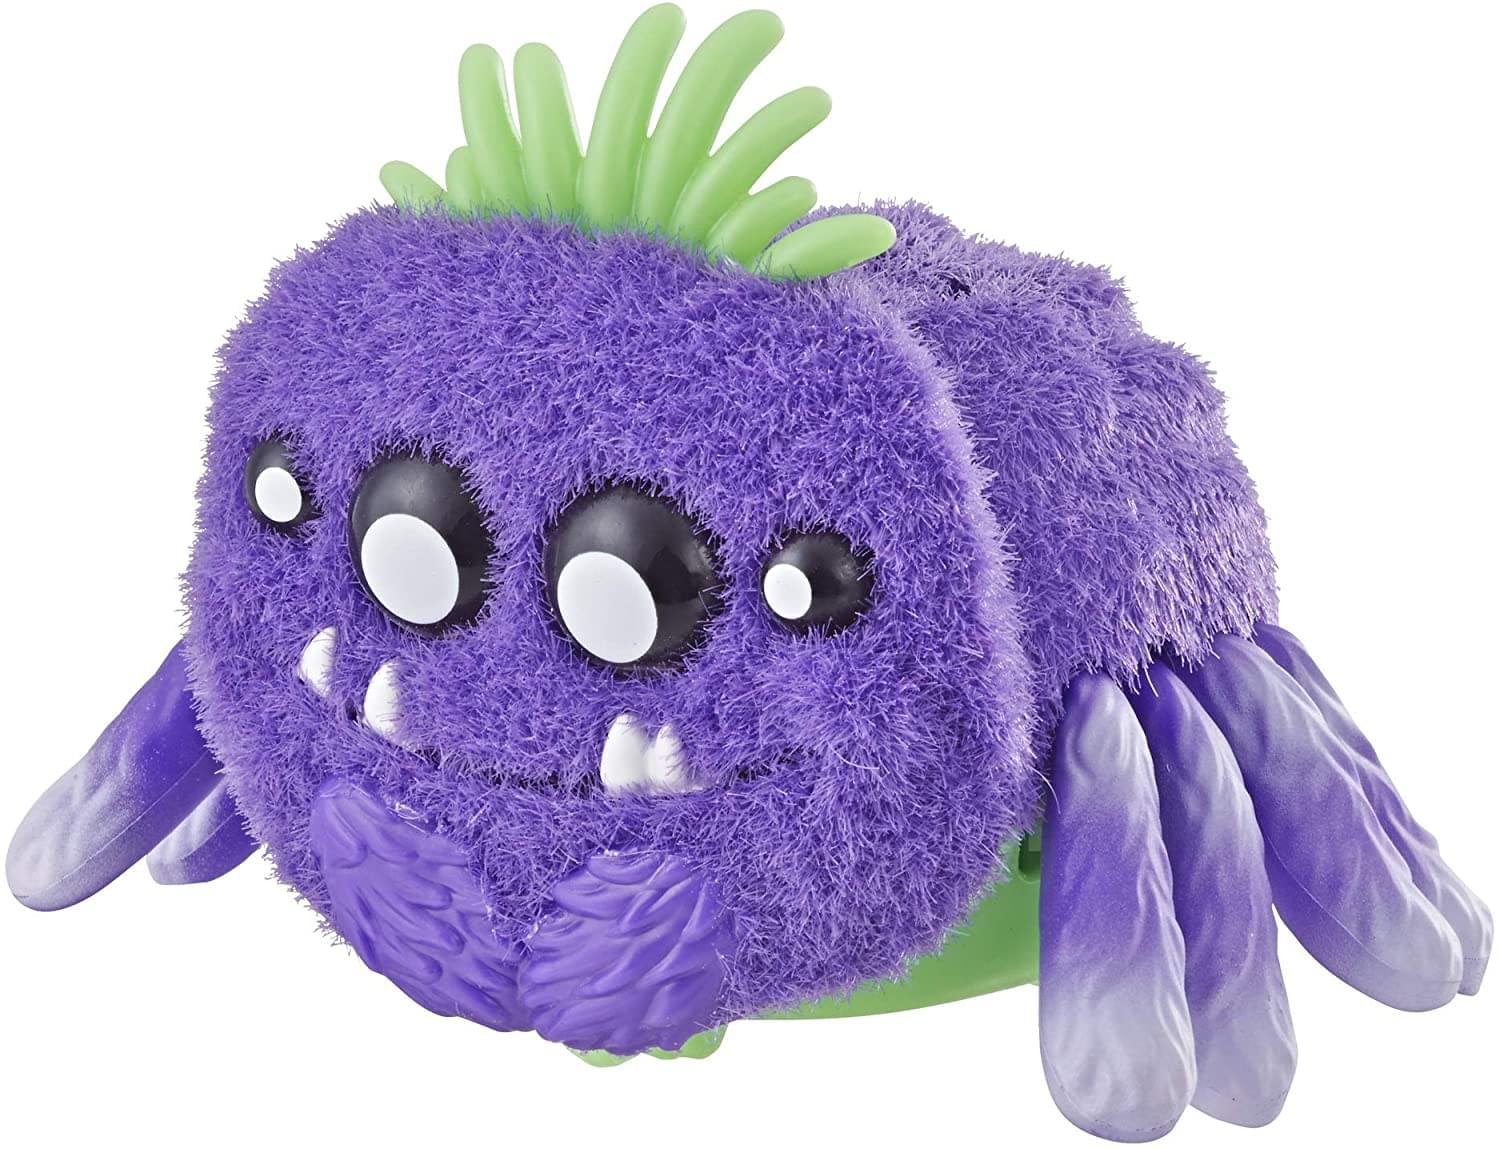 Yellies! Voice-Activated Spider Pet , Wiggly Wriggles